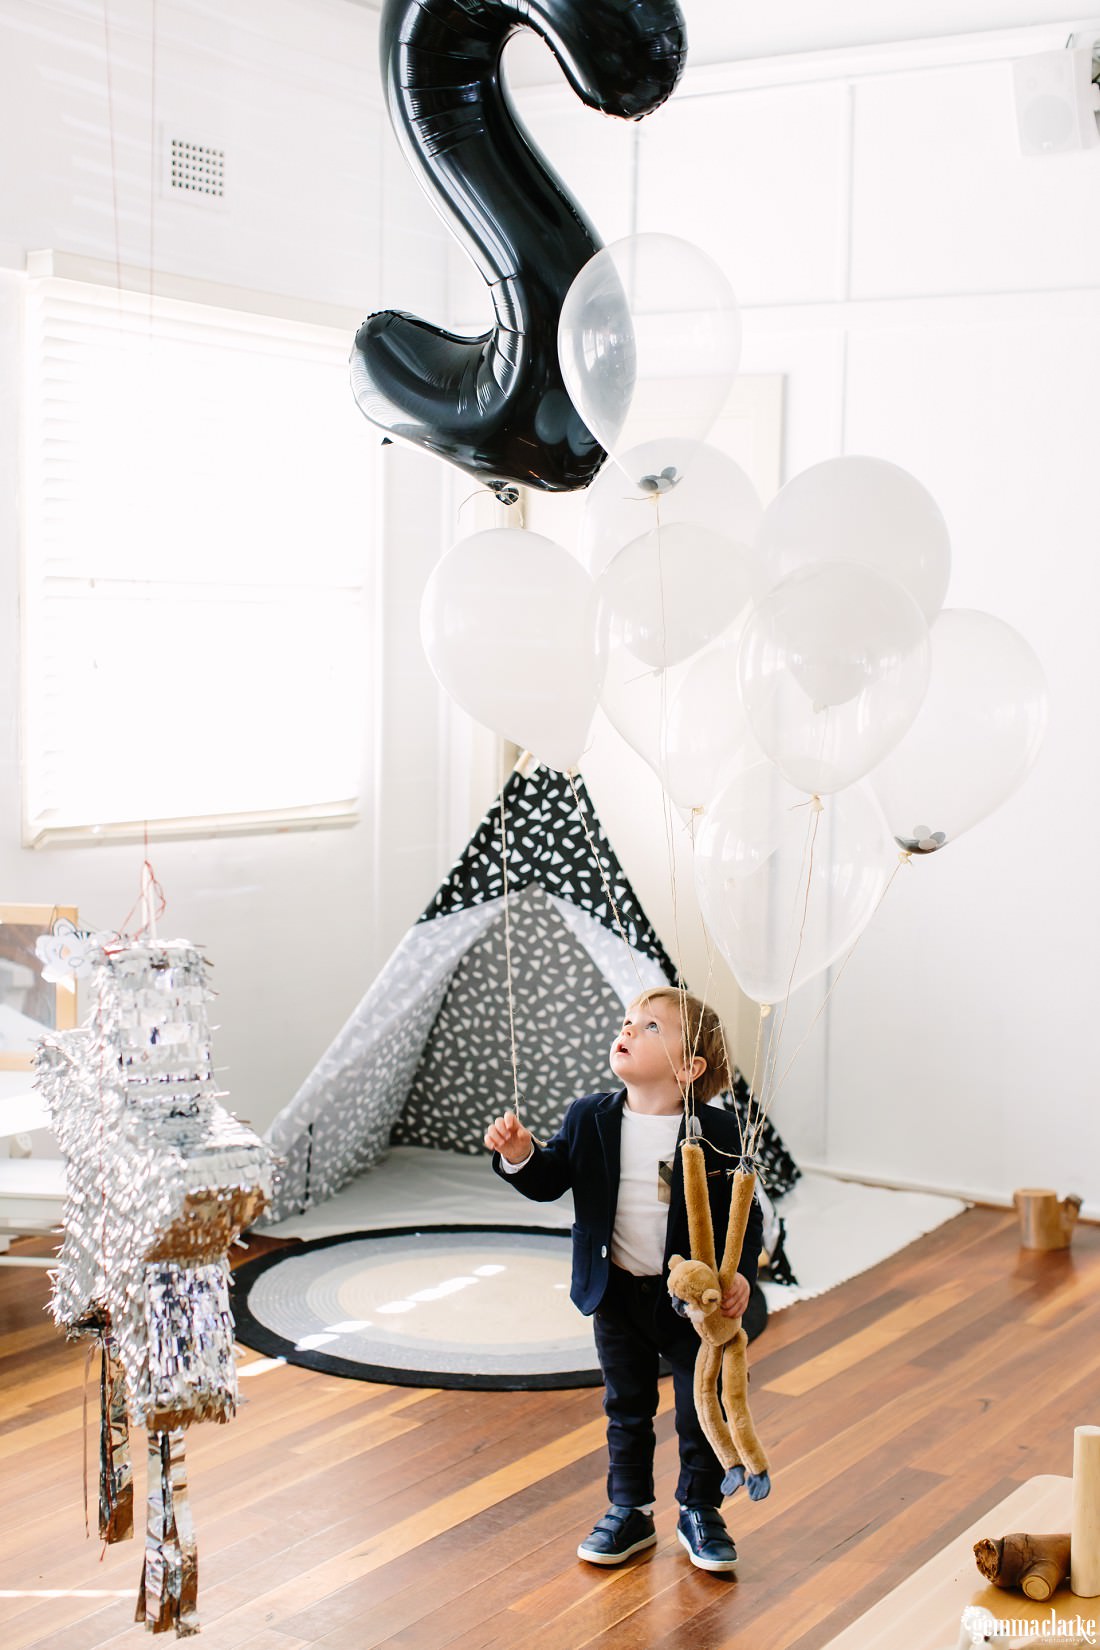 Henry stands in his room with a decorative tent behind him, the star shaped pinata in front of him whilst holding his large number 2 balloon and a light brown monkey toy which is attached to balloons and floating.